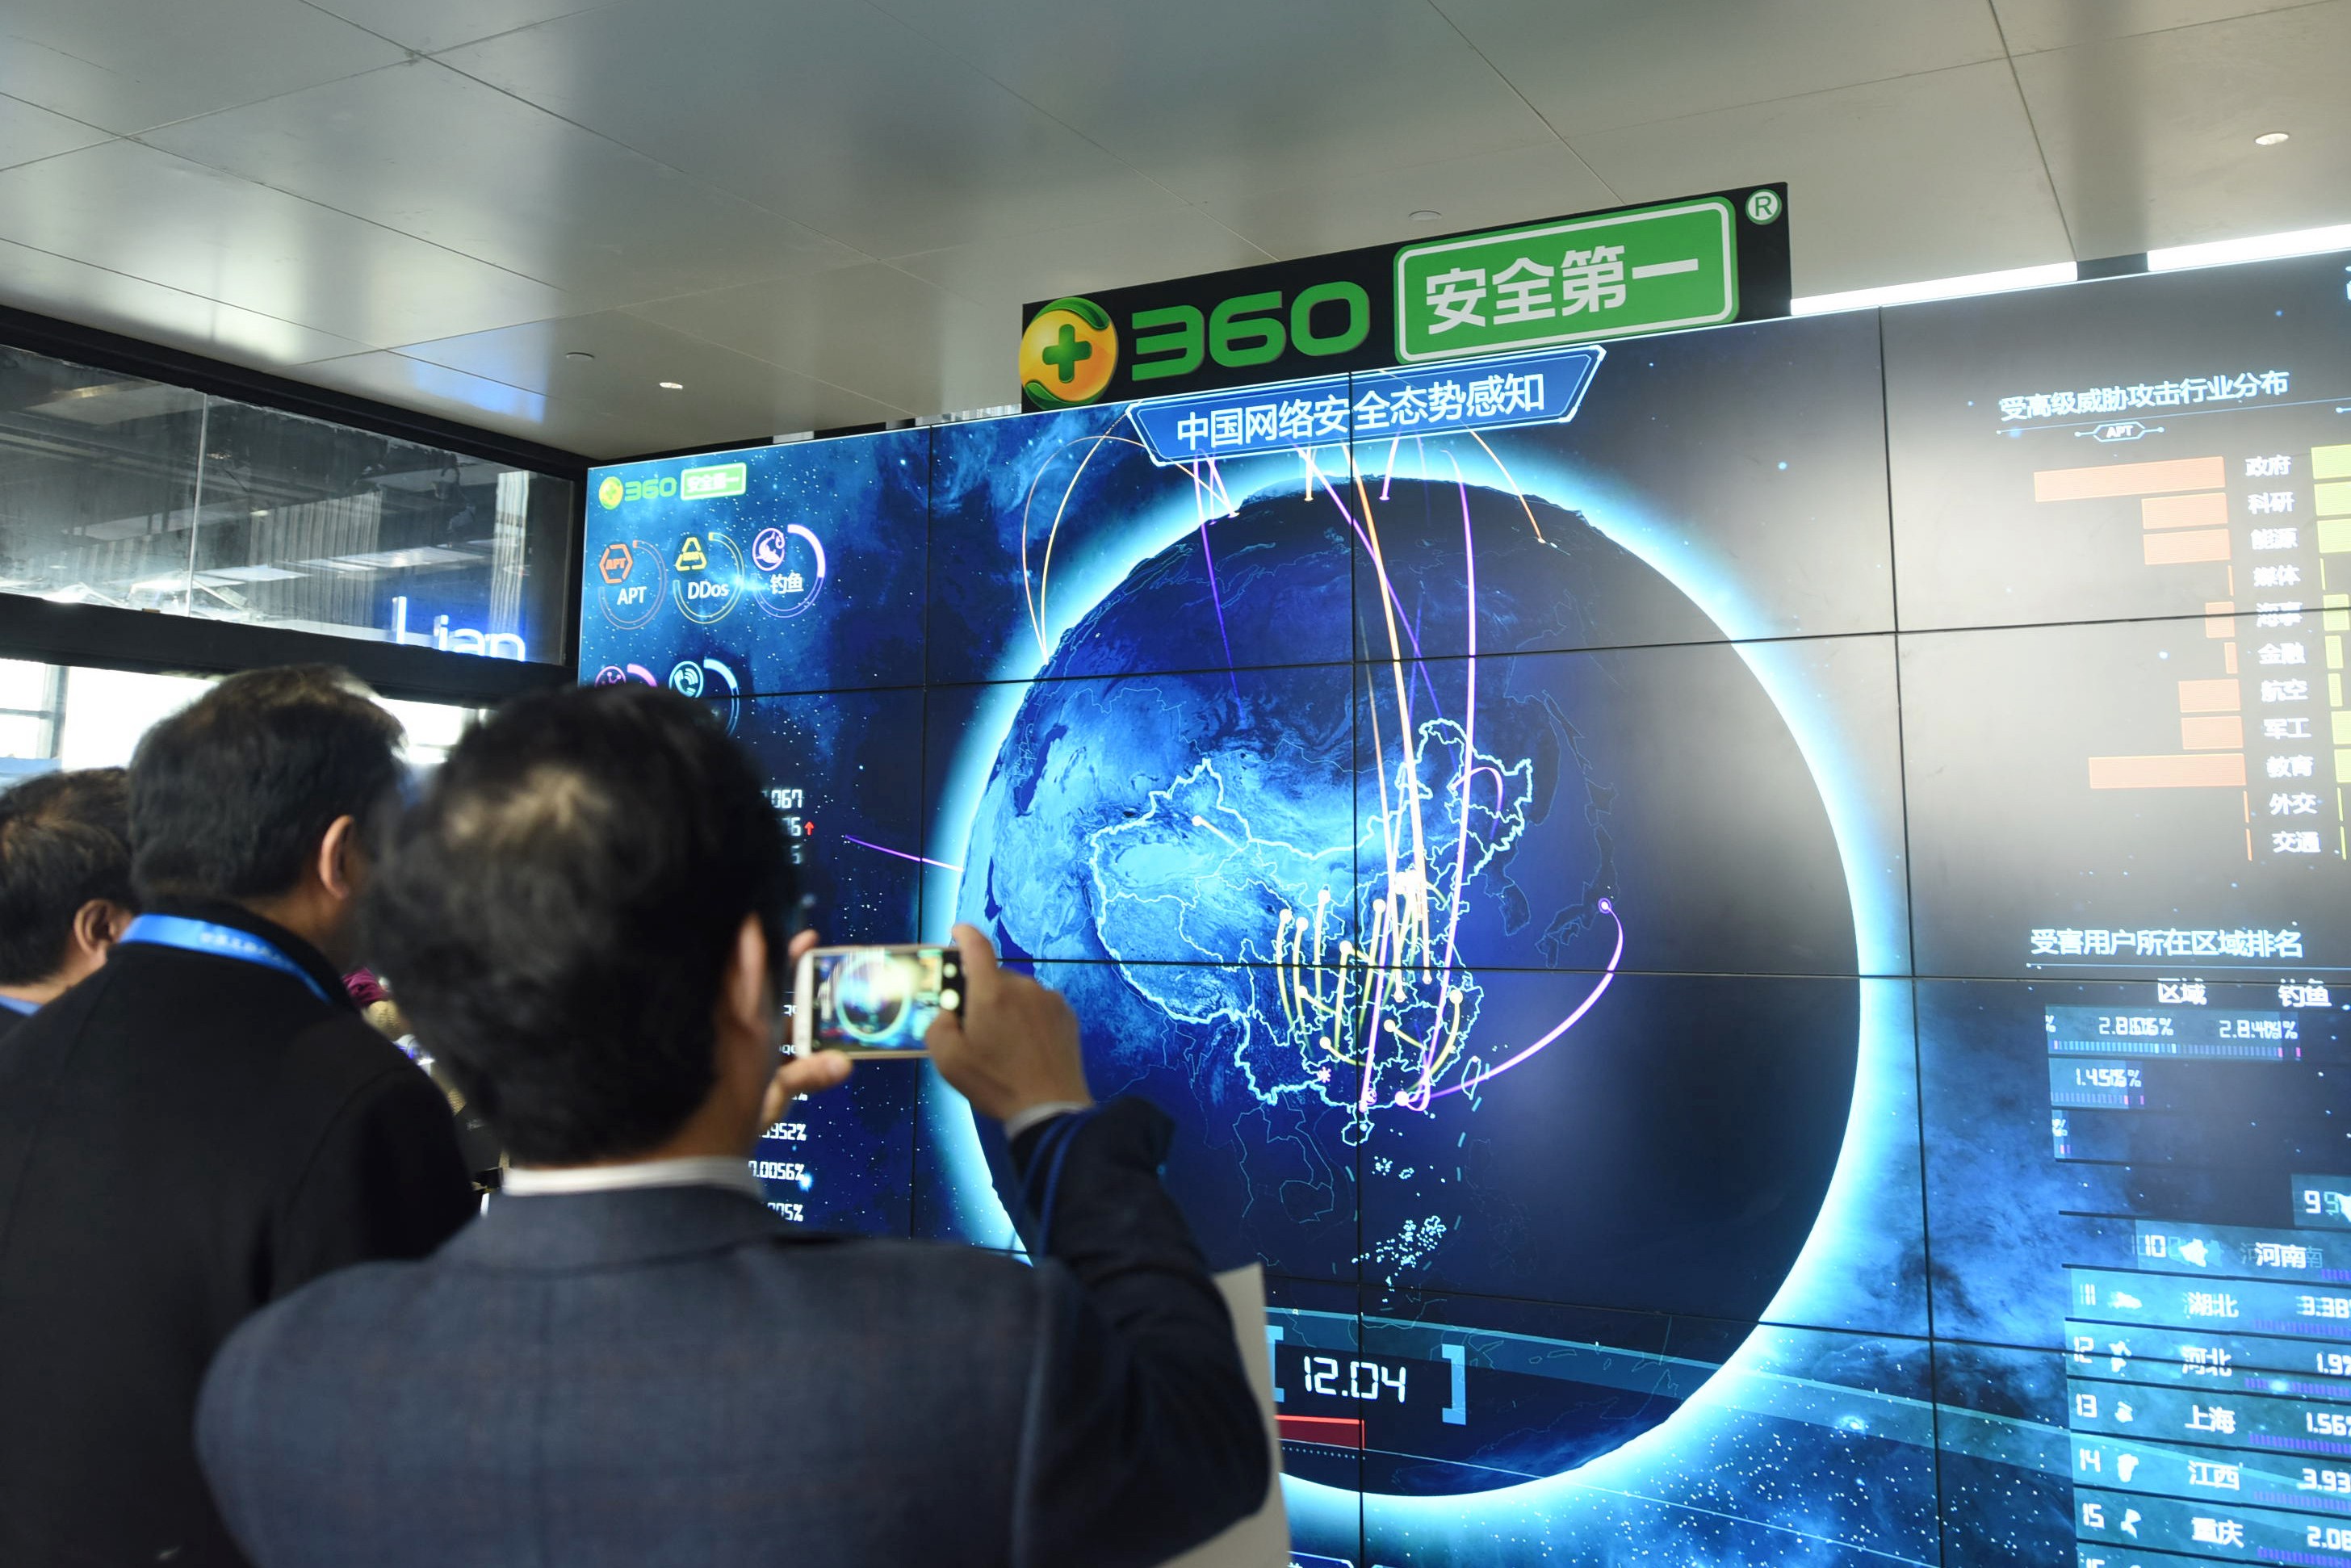 A man takes pictures of internet security data displayed on a screen at the Qihoo booth during the World Internet Conference in Wuzhen, China, last December. Photo: AFP